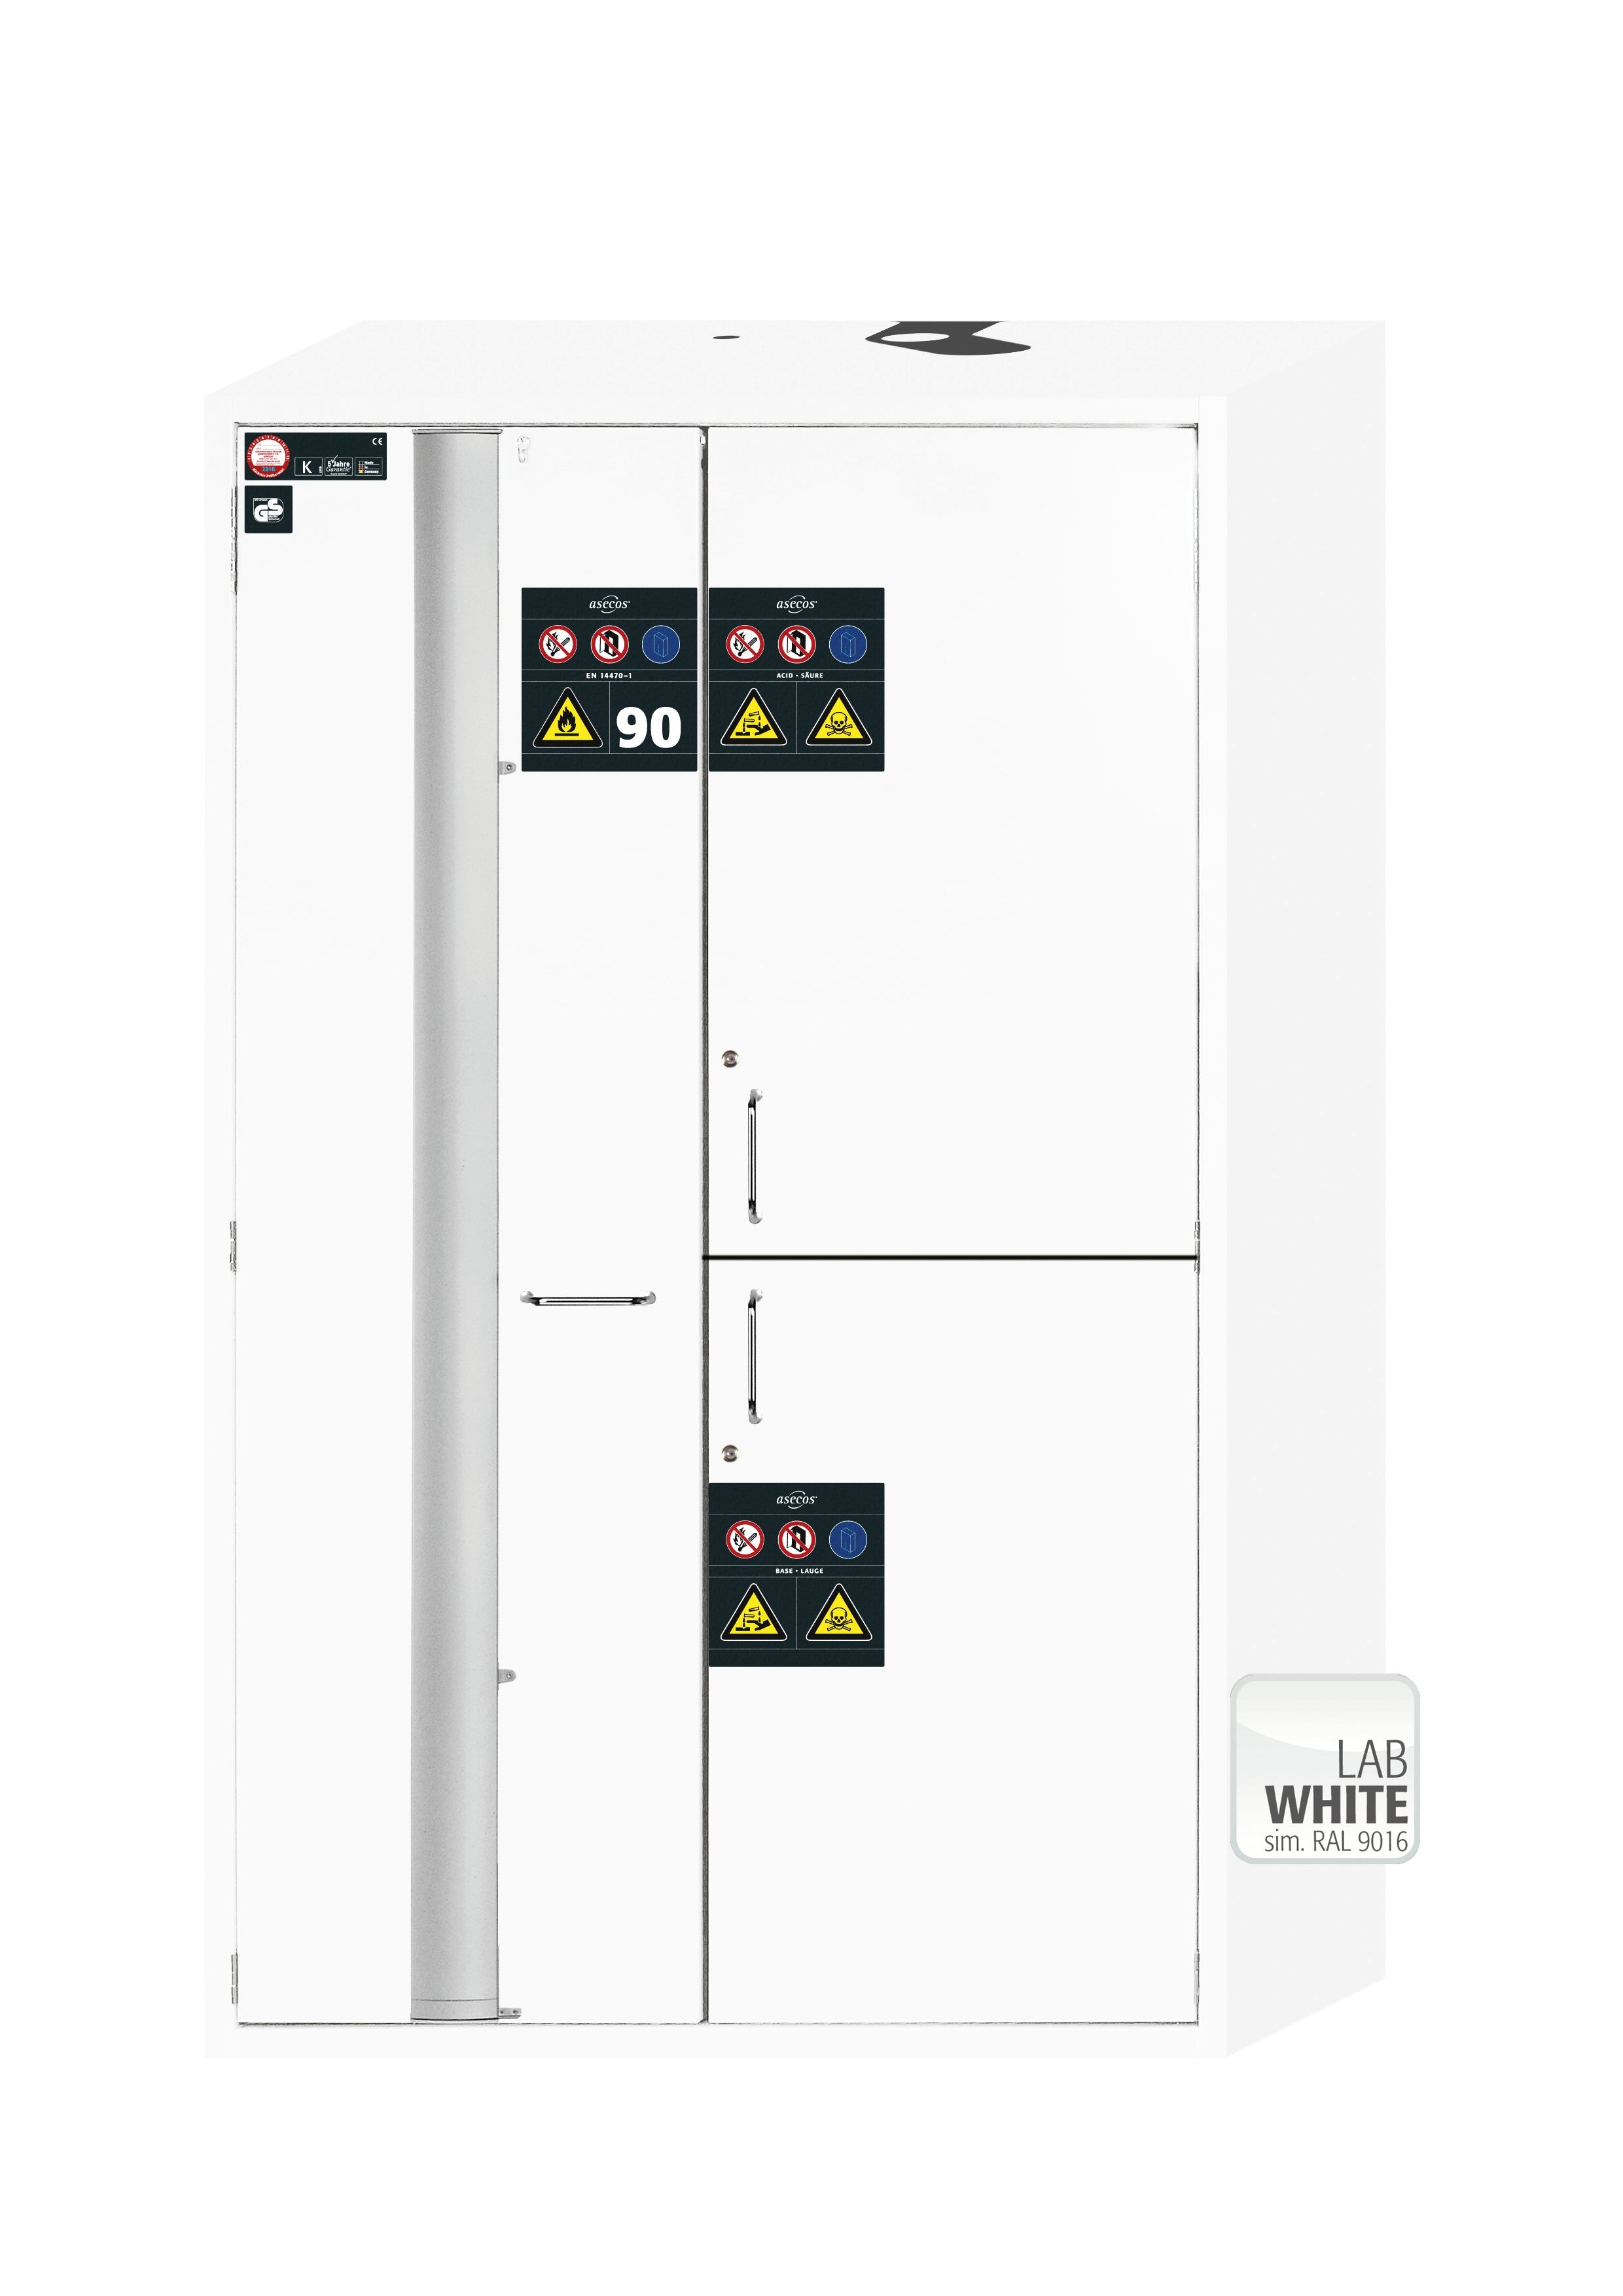 Type 90 combination safety cabinet K-PHOENIX Vol.2-90 model K90.196.120.MC.FWAC in laboratory white (similar to RAL 9016) with 4x standard pull-out tray (sheet steel)